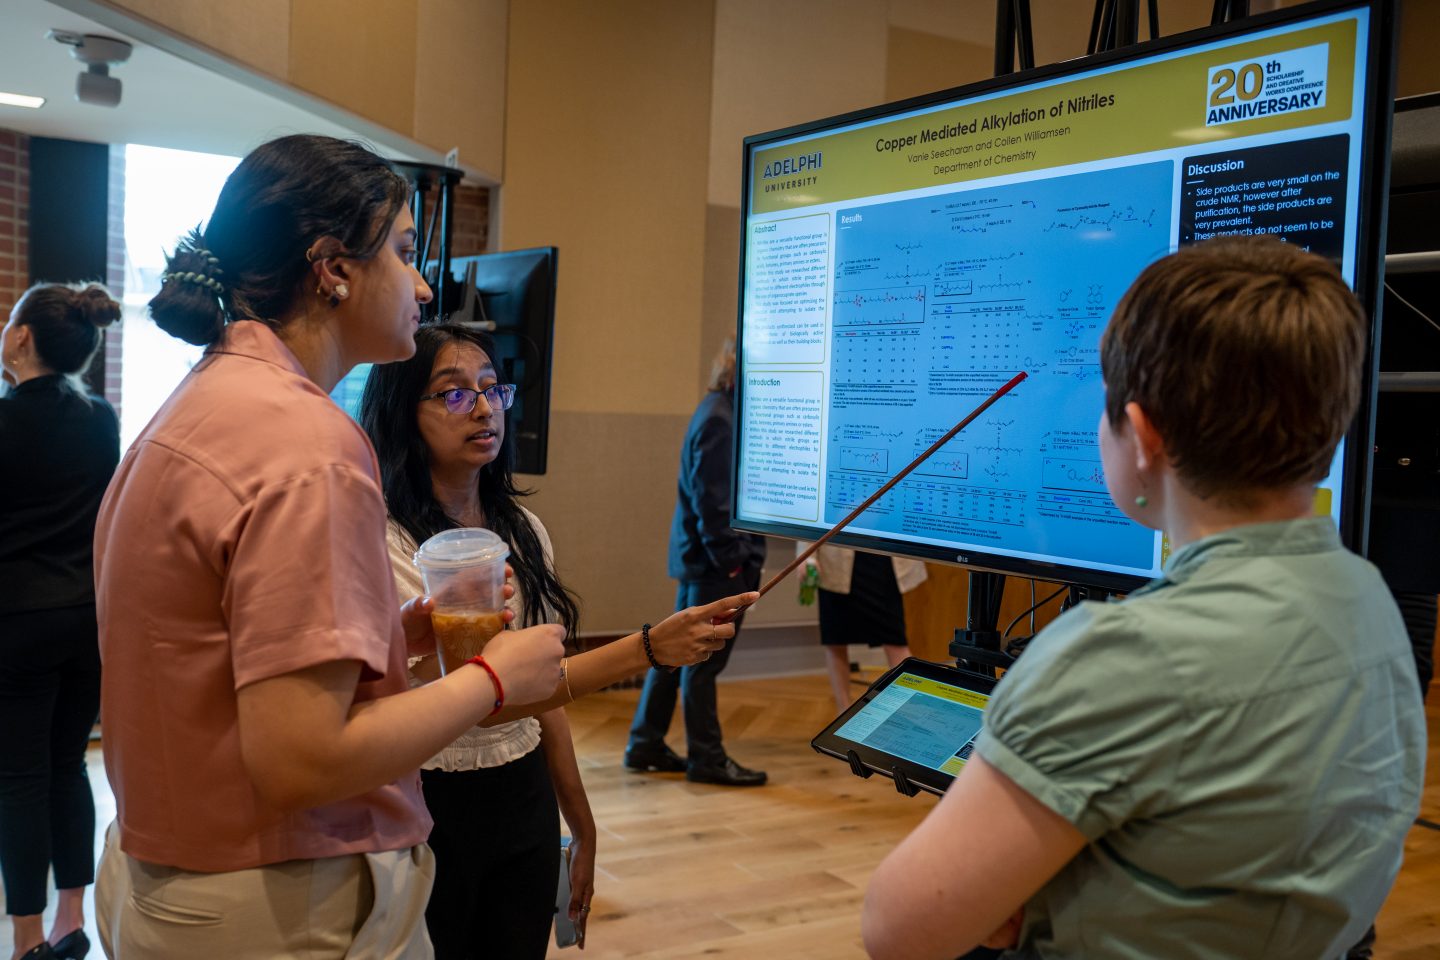 A Department of Chemistry Asian female student aims a pointer at statistics on her team’s Scholarship and Creative Works Conference e-poster, as she explains her topic to two other young women.